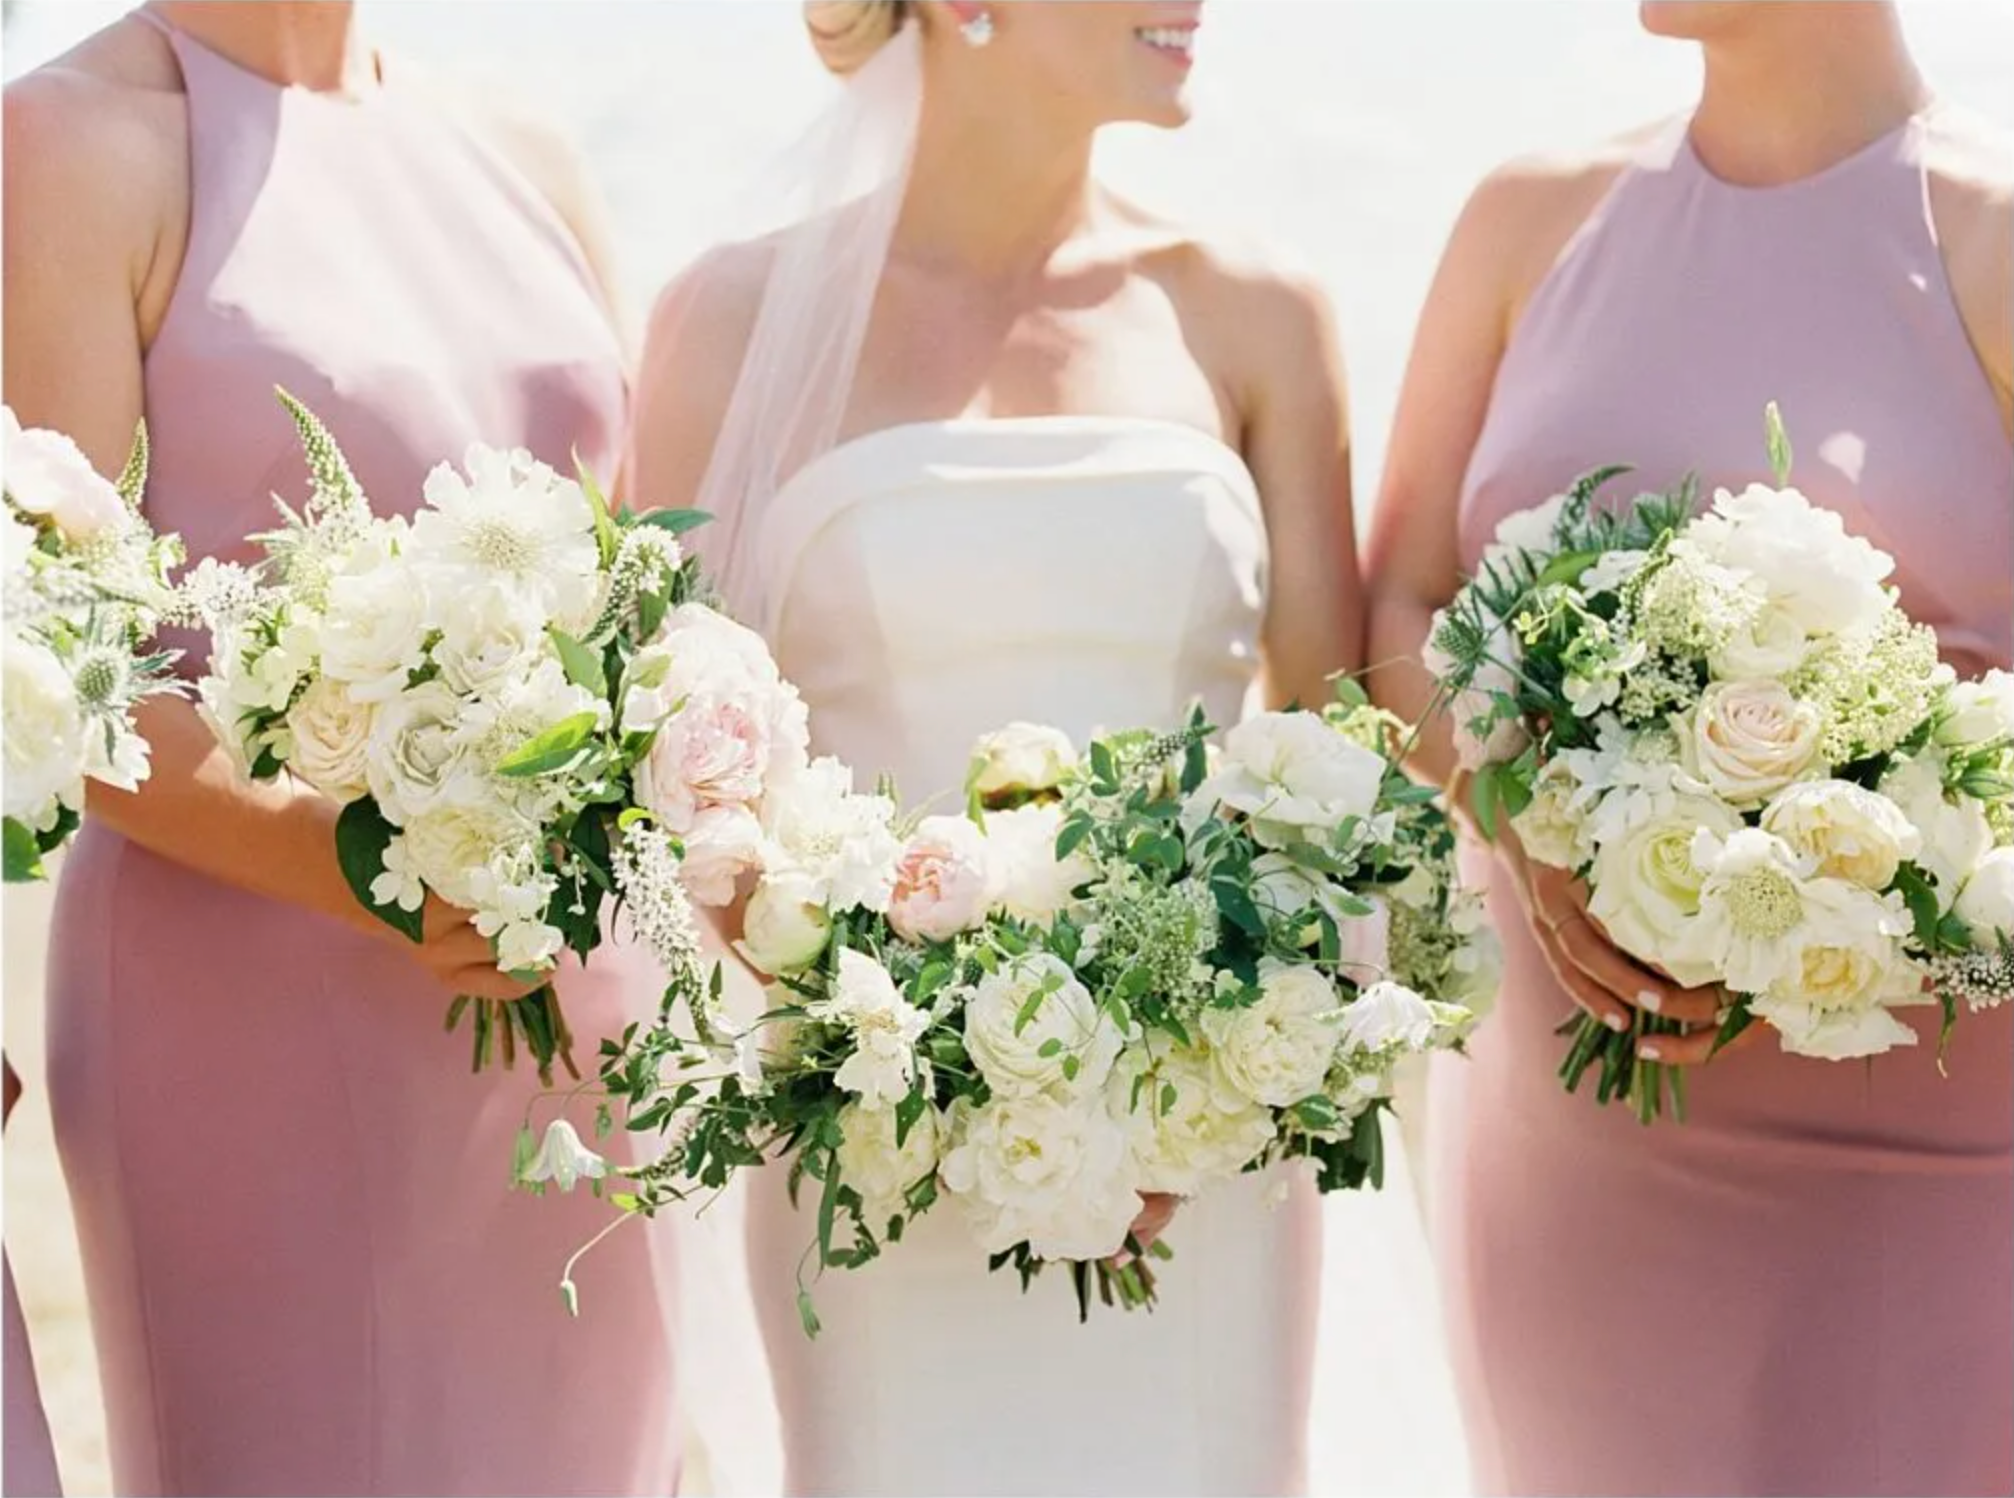 Half body shot of bride in the center with two bridesmaids in pink on either side with everyone holding bouquets of flowers